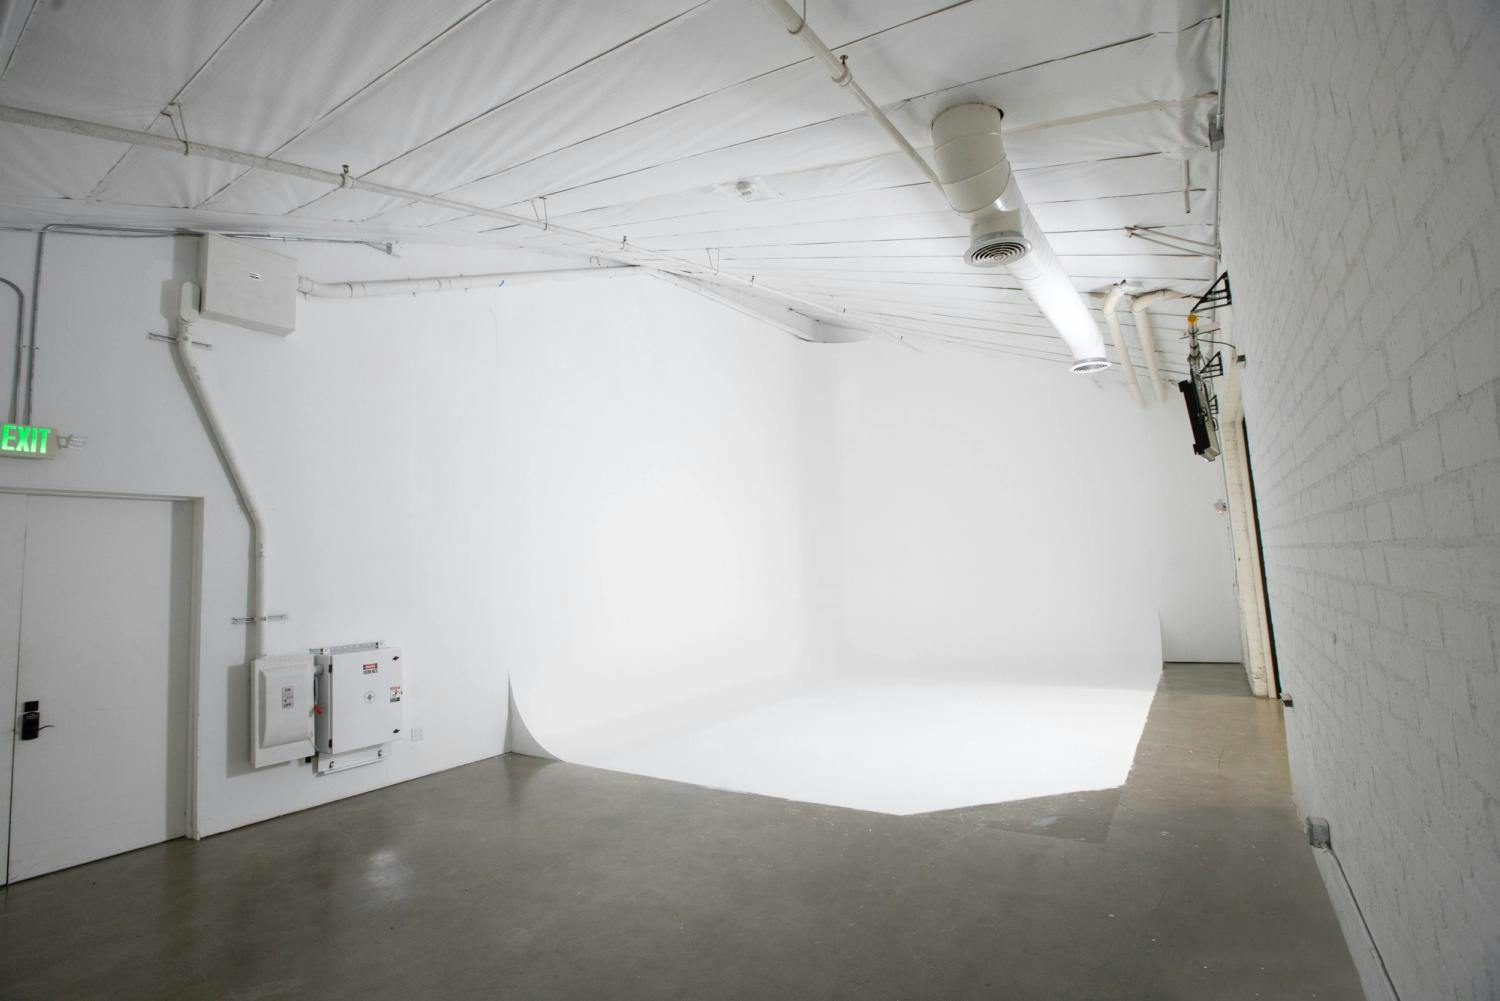 A spacious and bright photography studio with white walls, concrete floor, and industrial ceiling features such as air ducts and pipes.